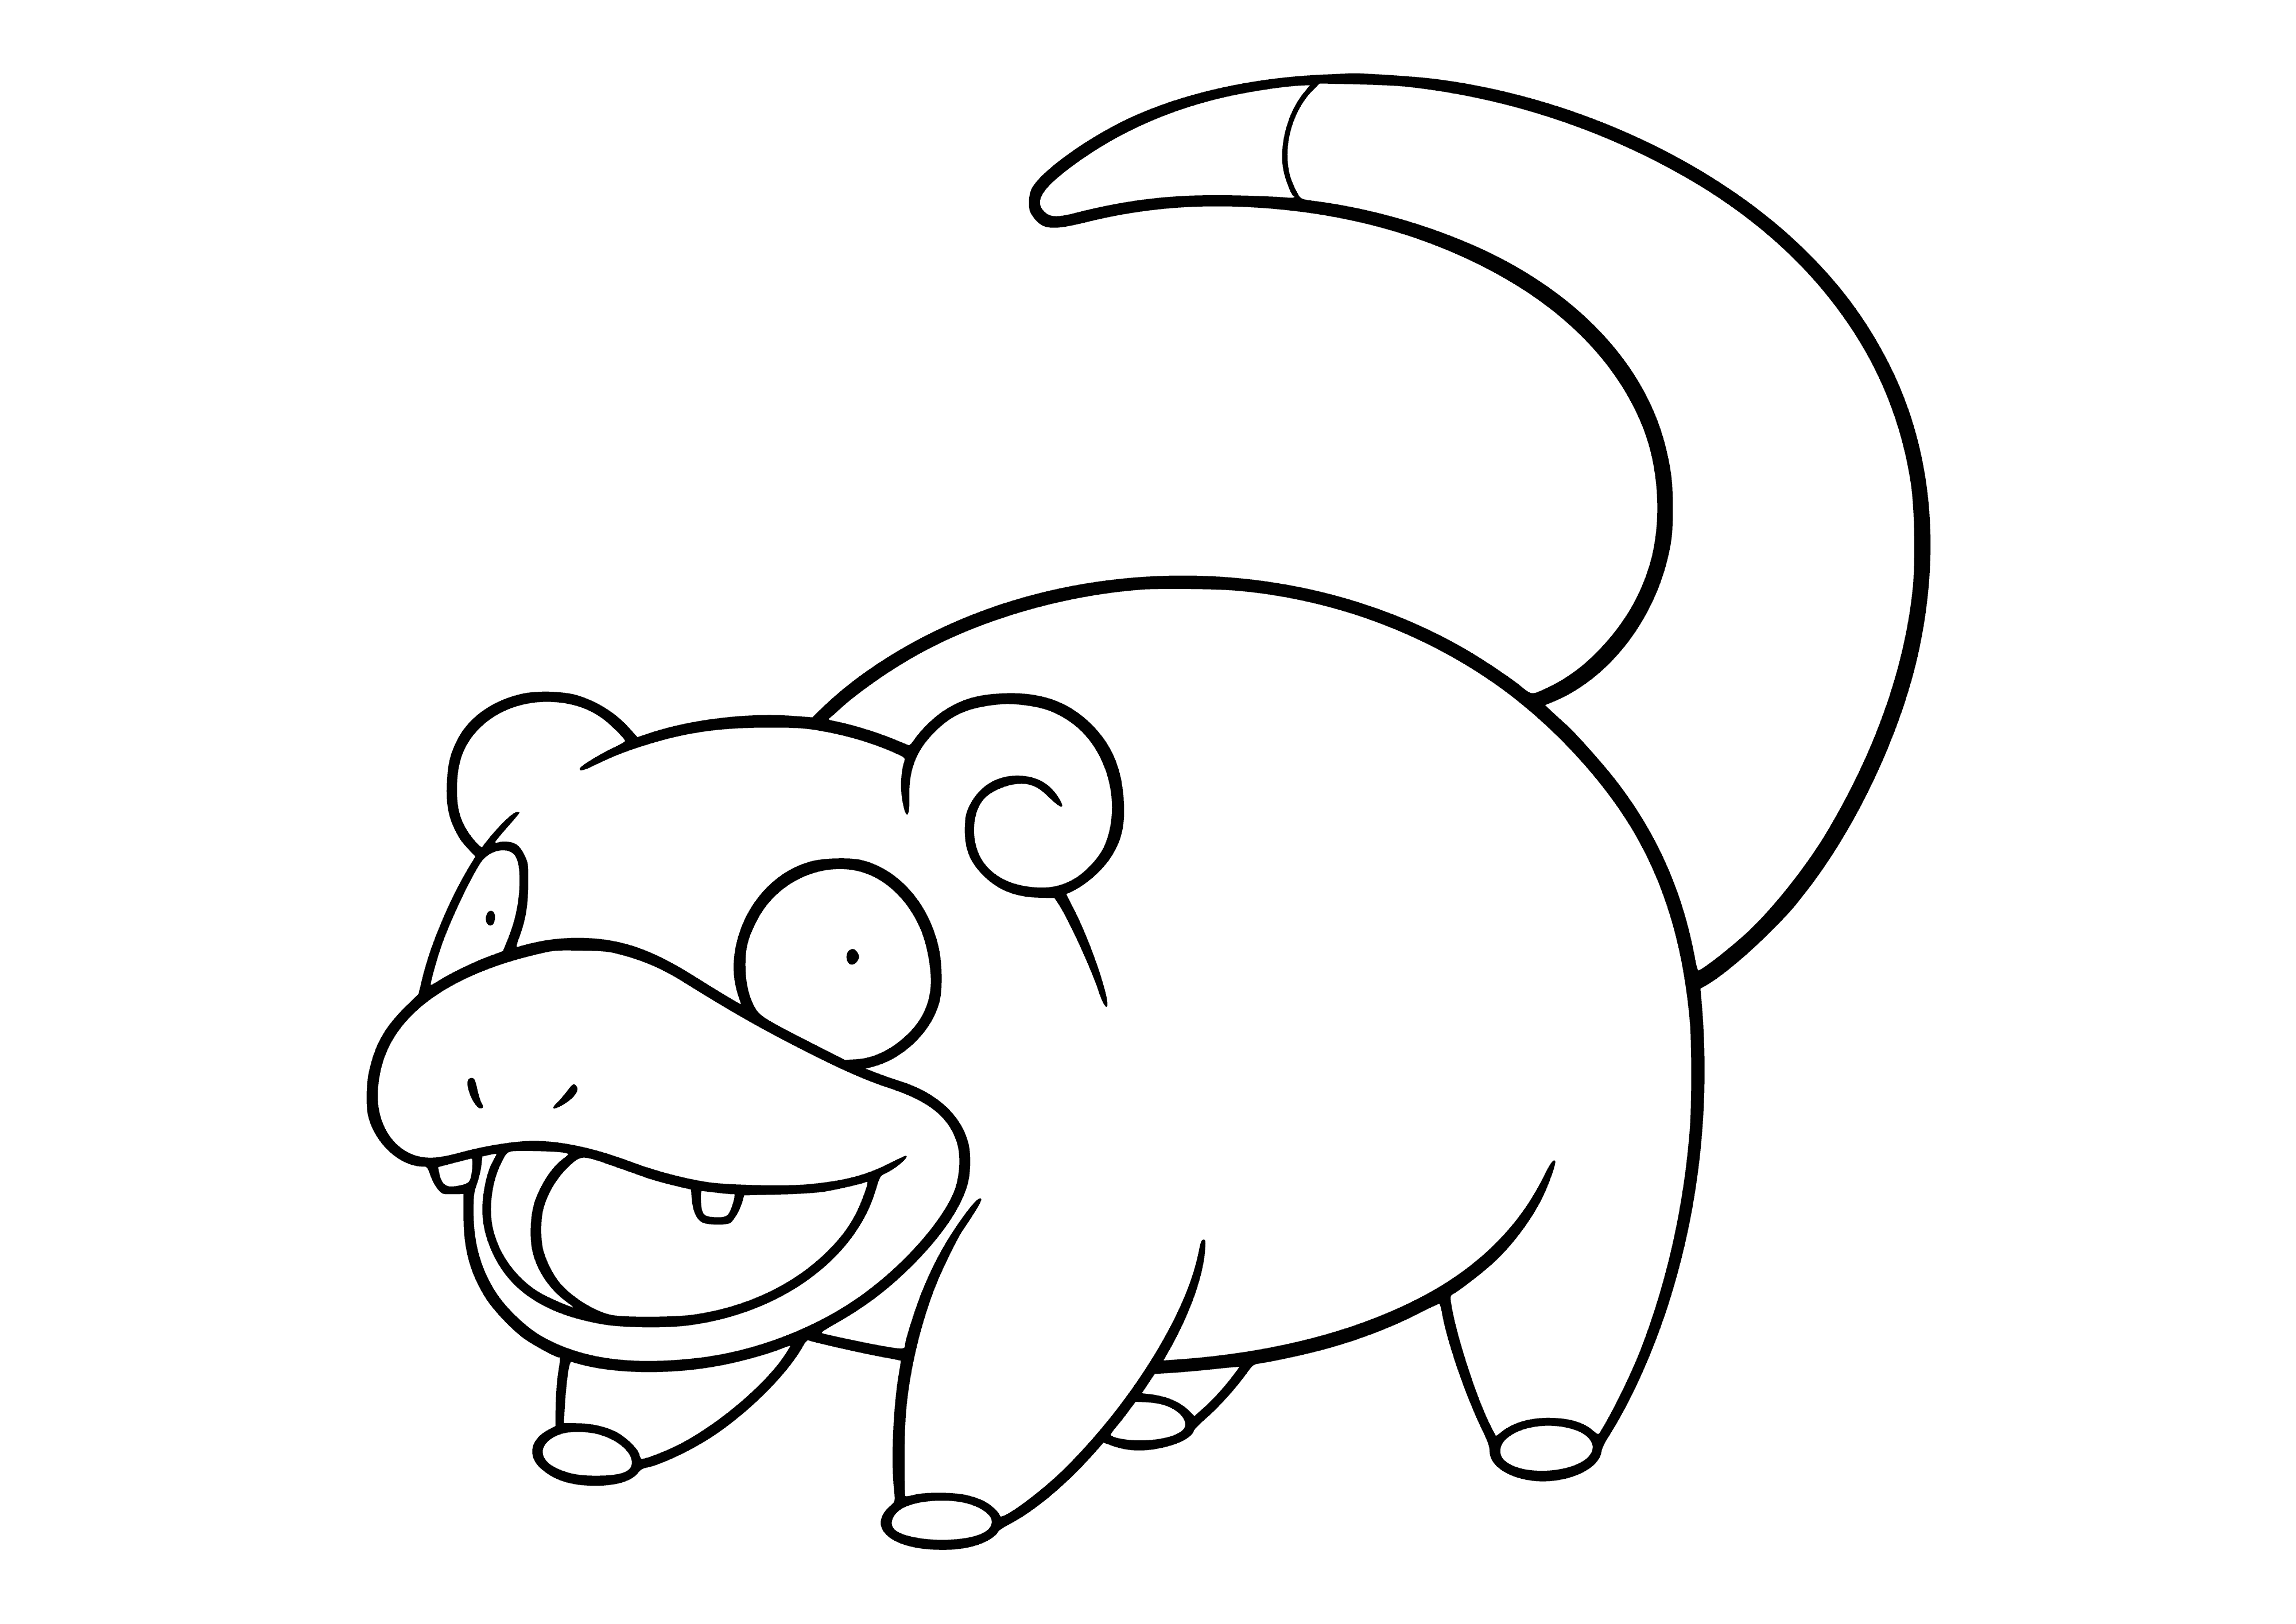 coloring page: A blue turtle-like creature with pink tail, blank expression, and drooping tail.